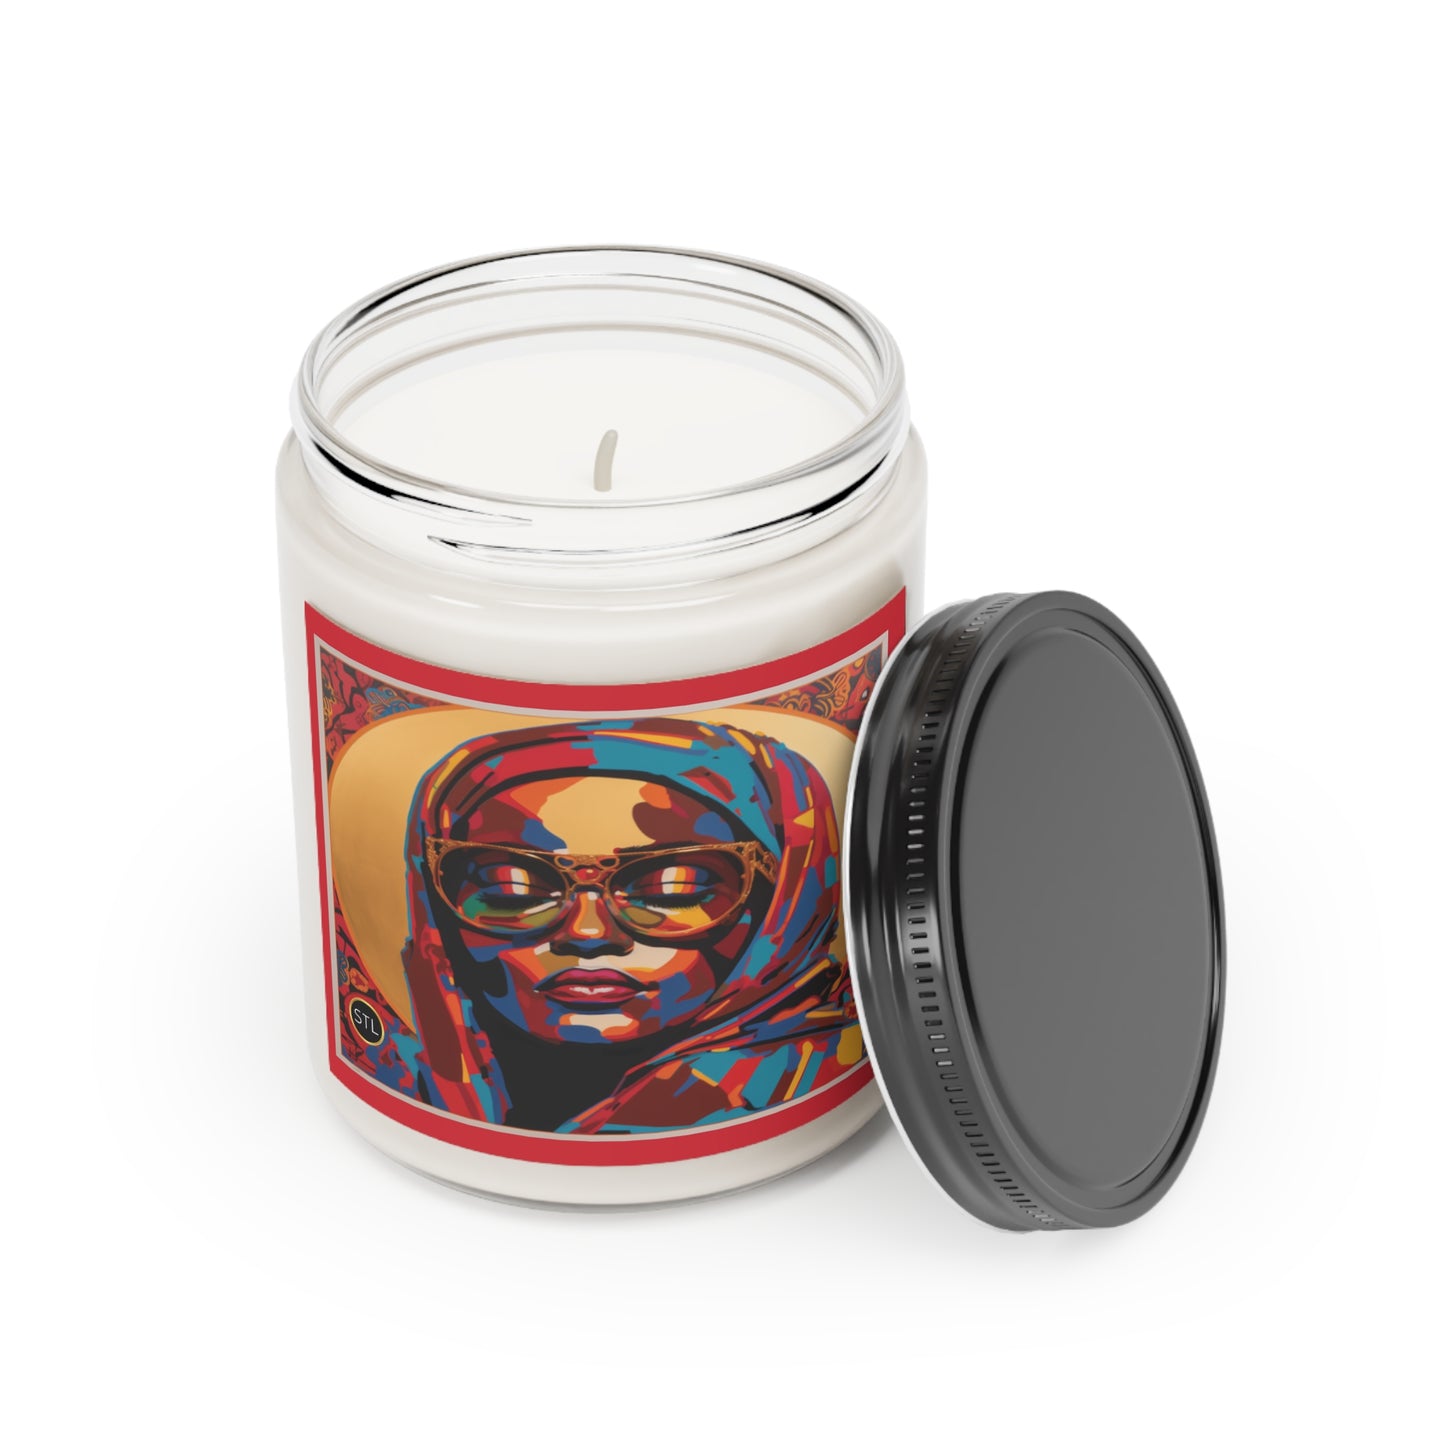 Black Madonna Hand-Poured Vegan Soy Scented Candle - Cinnamon, 9oz